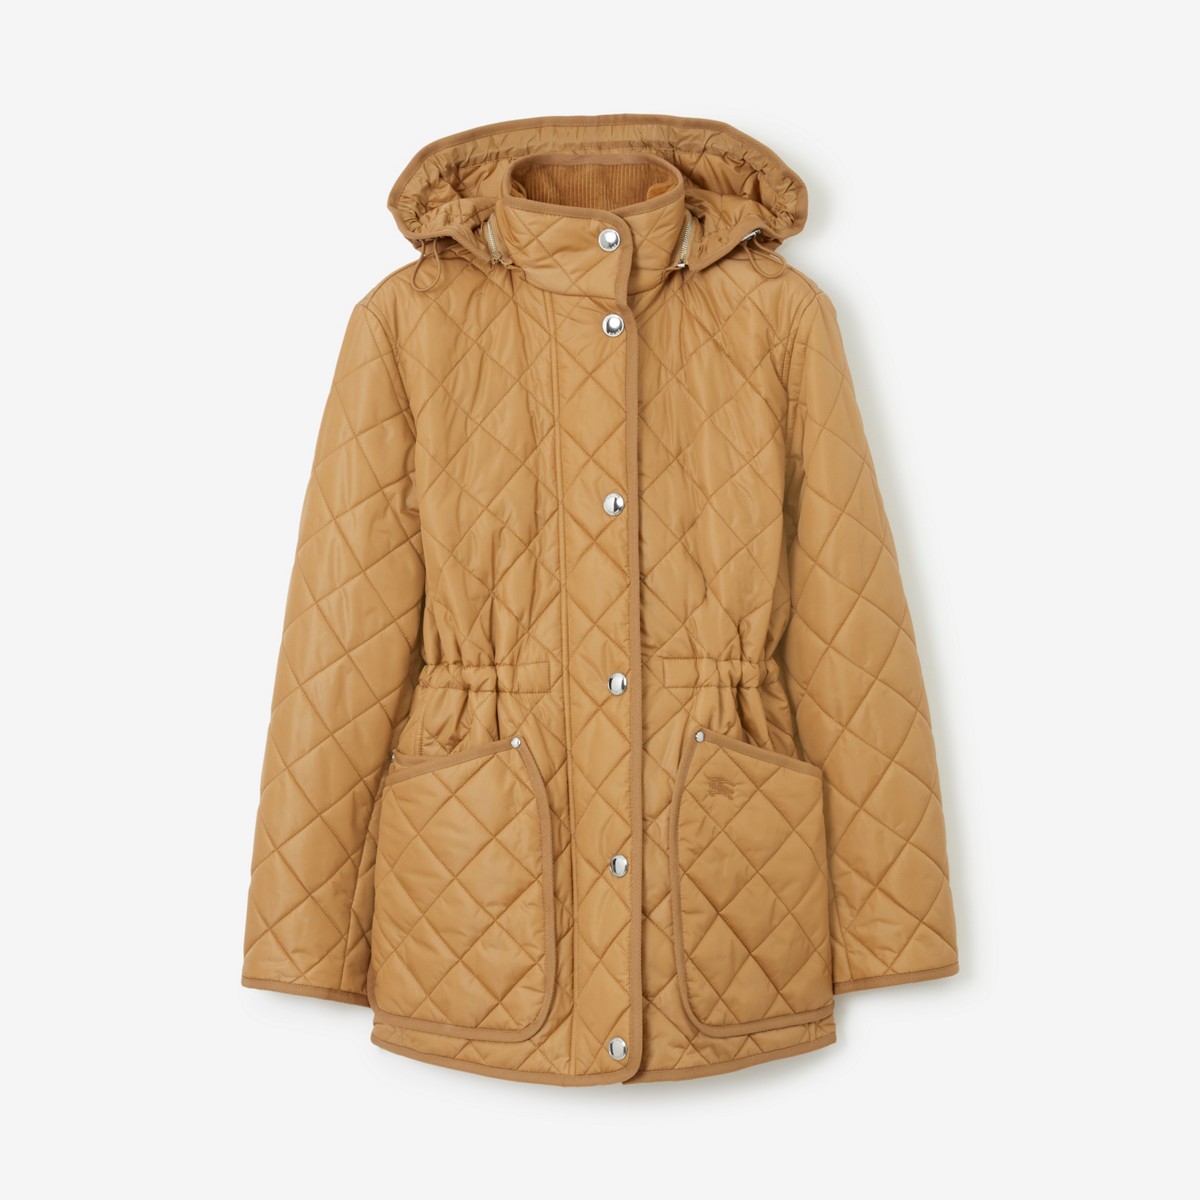 Burberry Diamond Quilted Nylon Jacket In Archive Beige